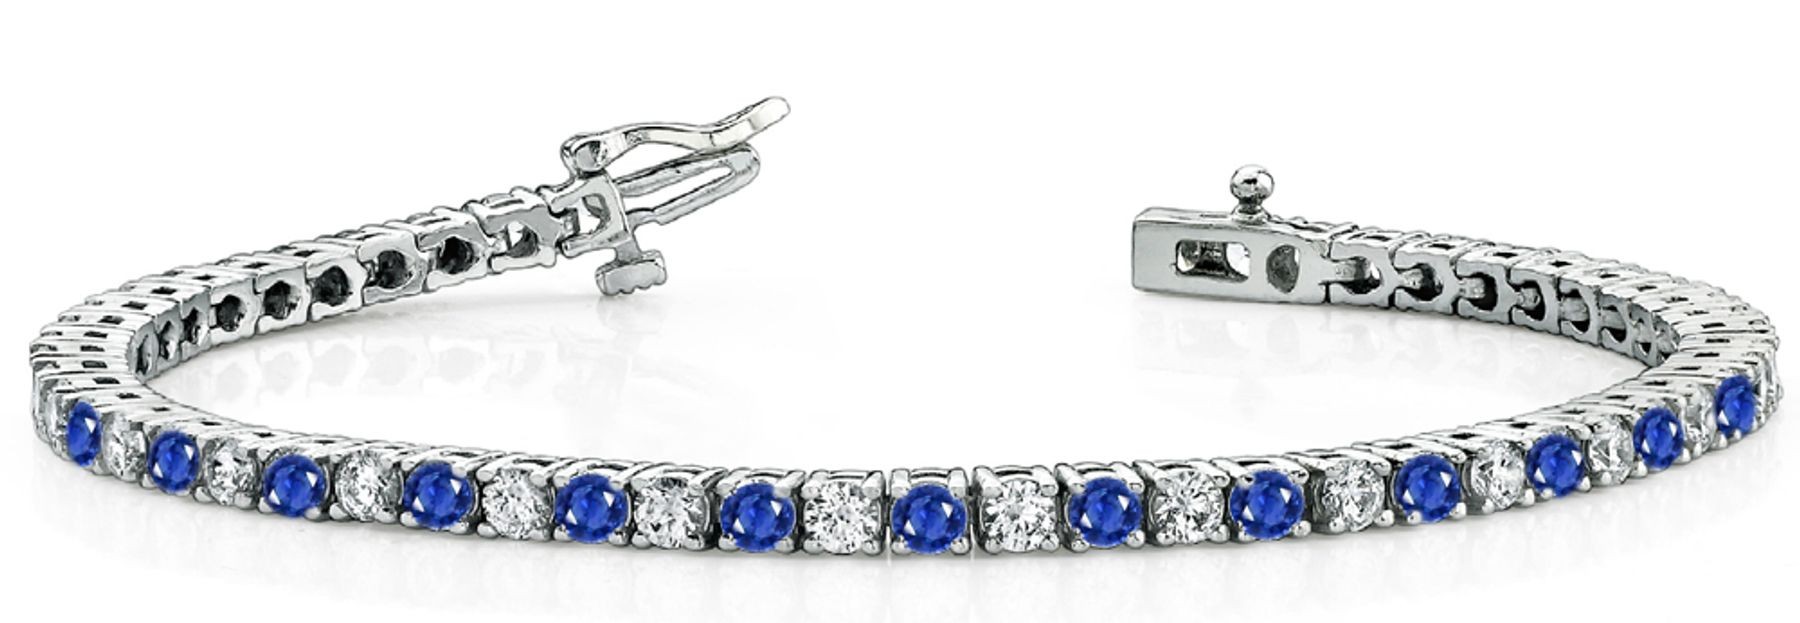 View Bracelets | Diamond and Sapphire Color Clarity Grading